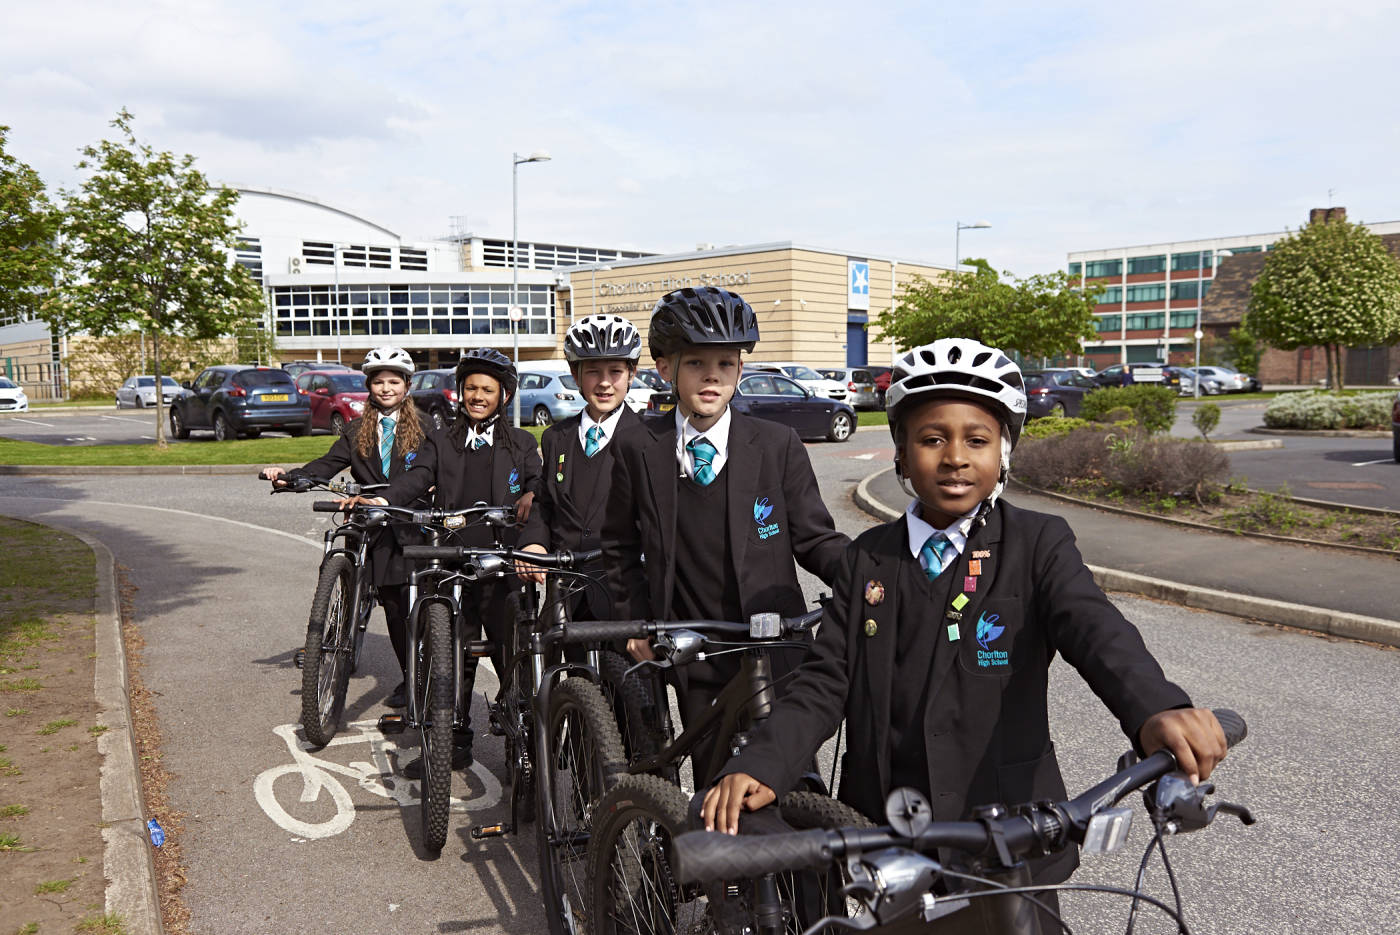 High school students stood next to their bikes on a cycle lane